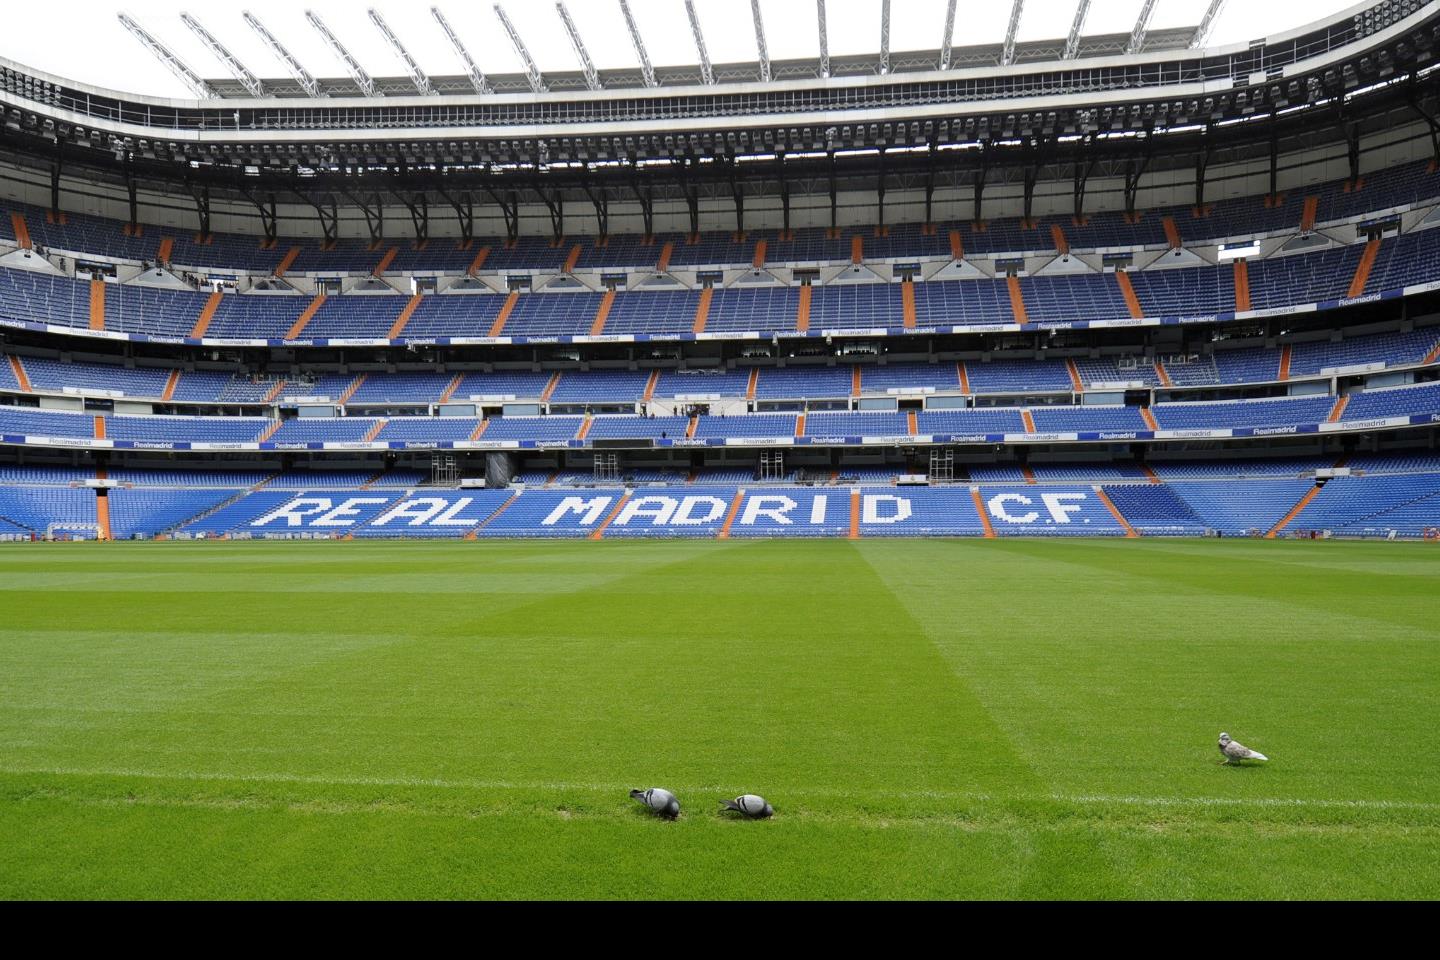 Real Madrid FC Tickets | Buy or Sell Tickets for Real Madrid FC's 2022